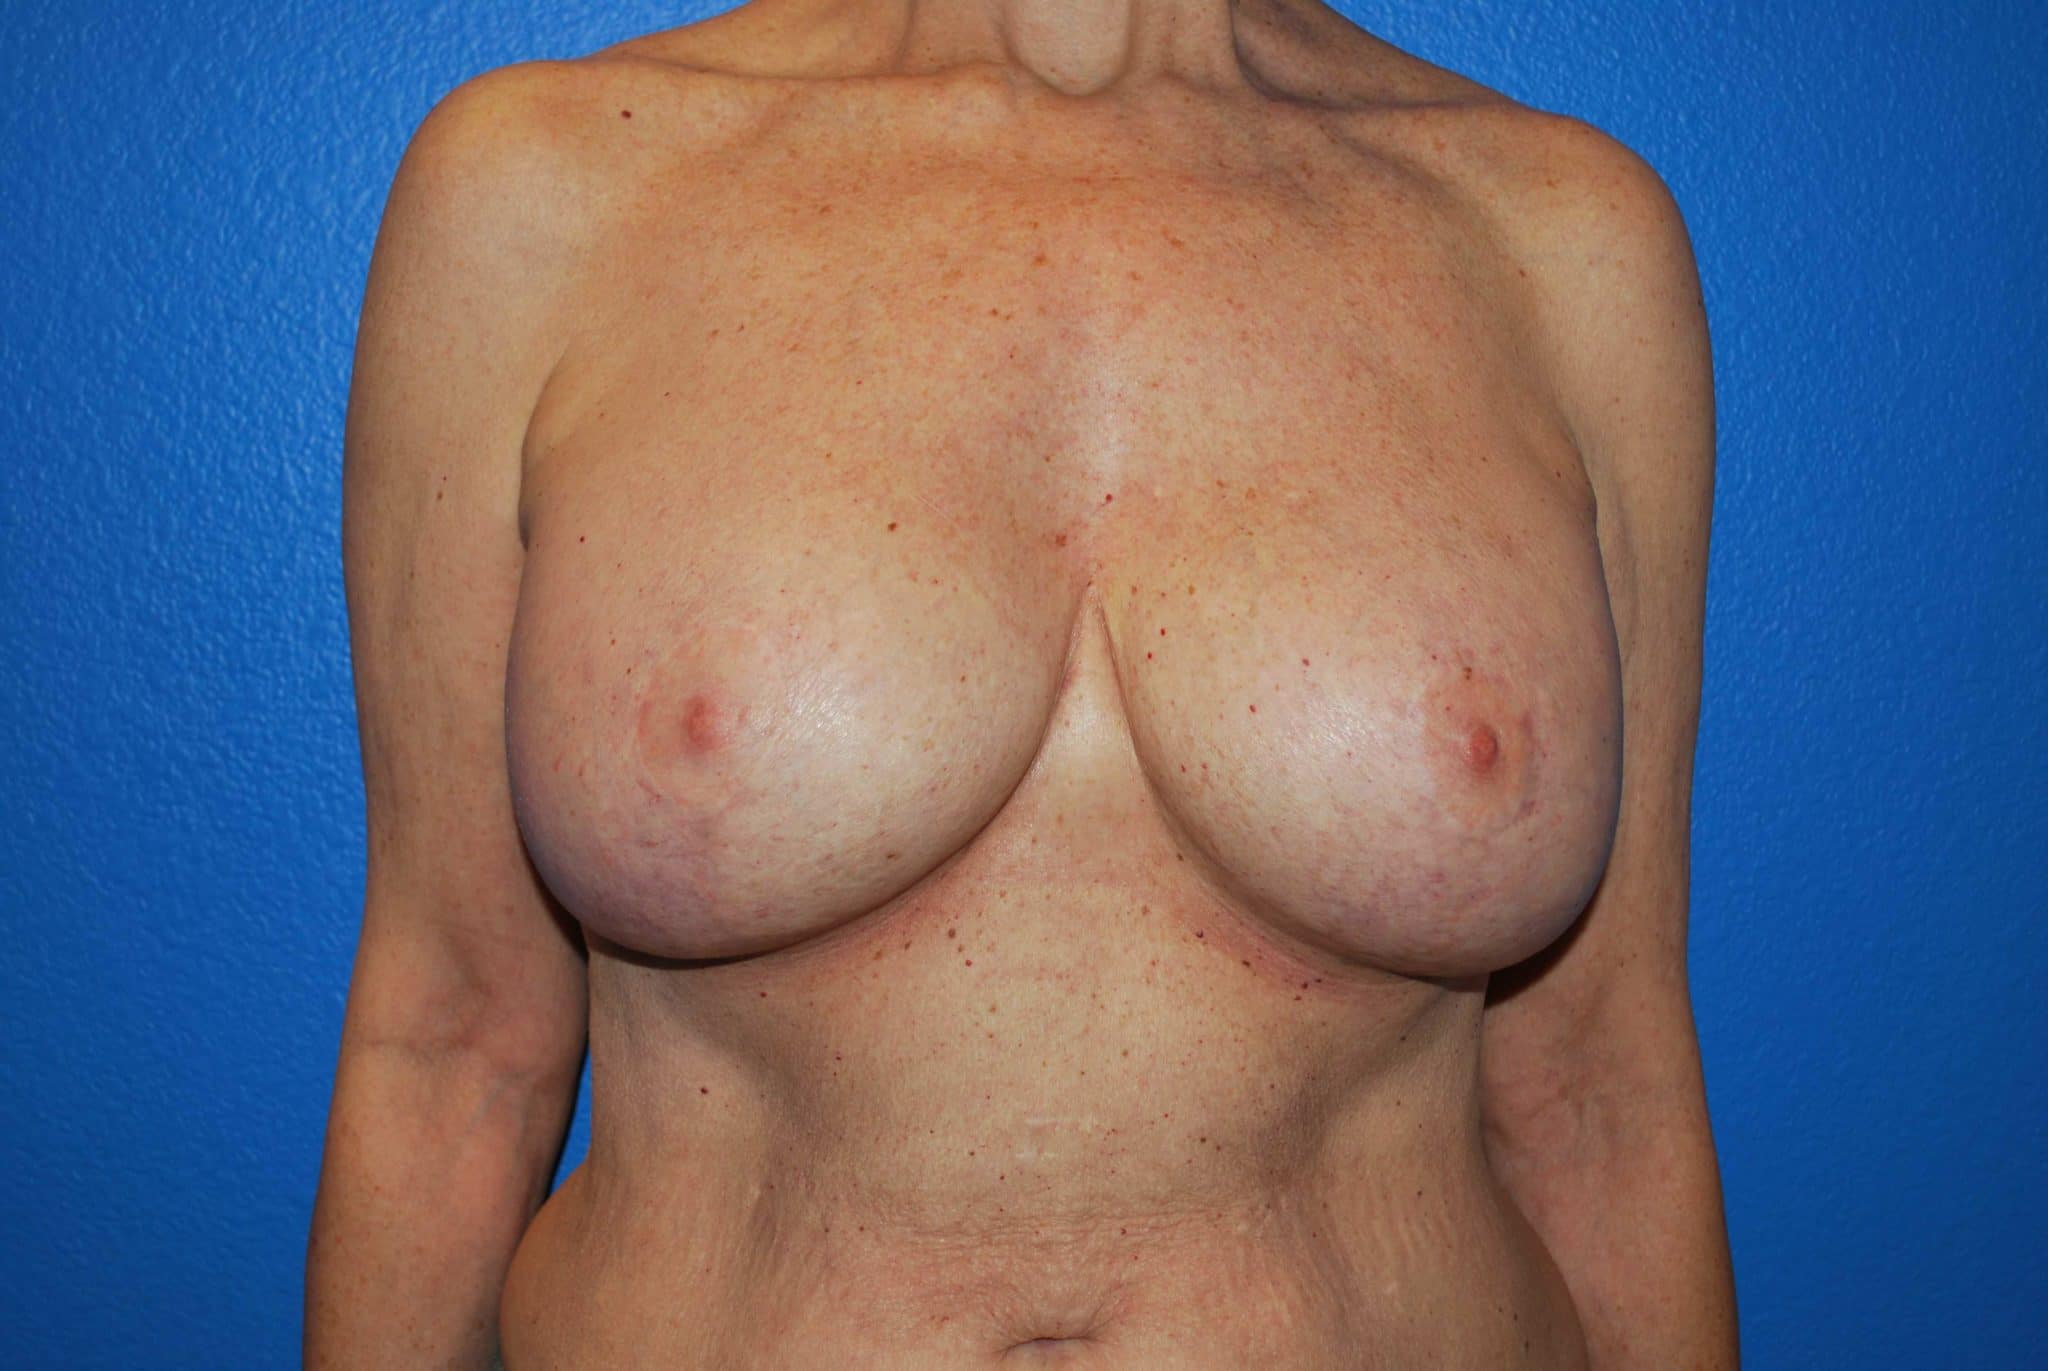 after breast implant exchange surgery